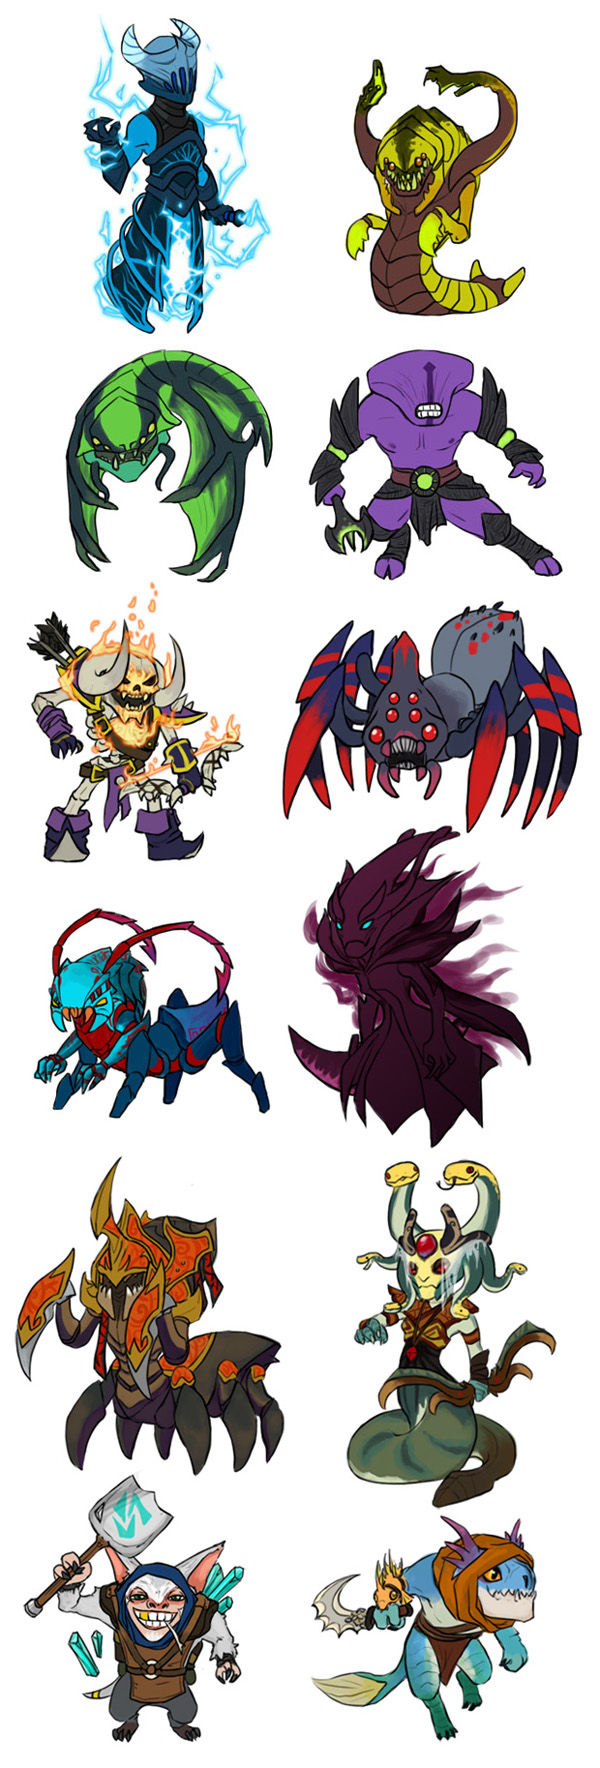 Dota 2 AGI dire heroes by spidercandy on DeviantArt